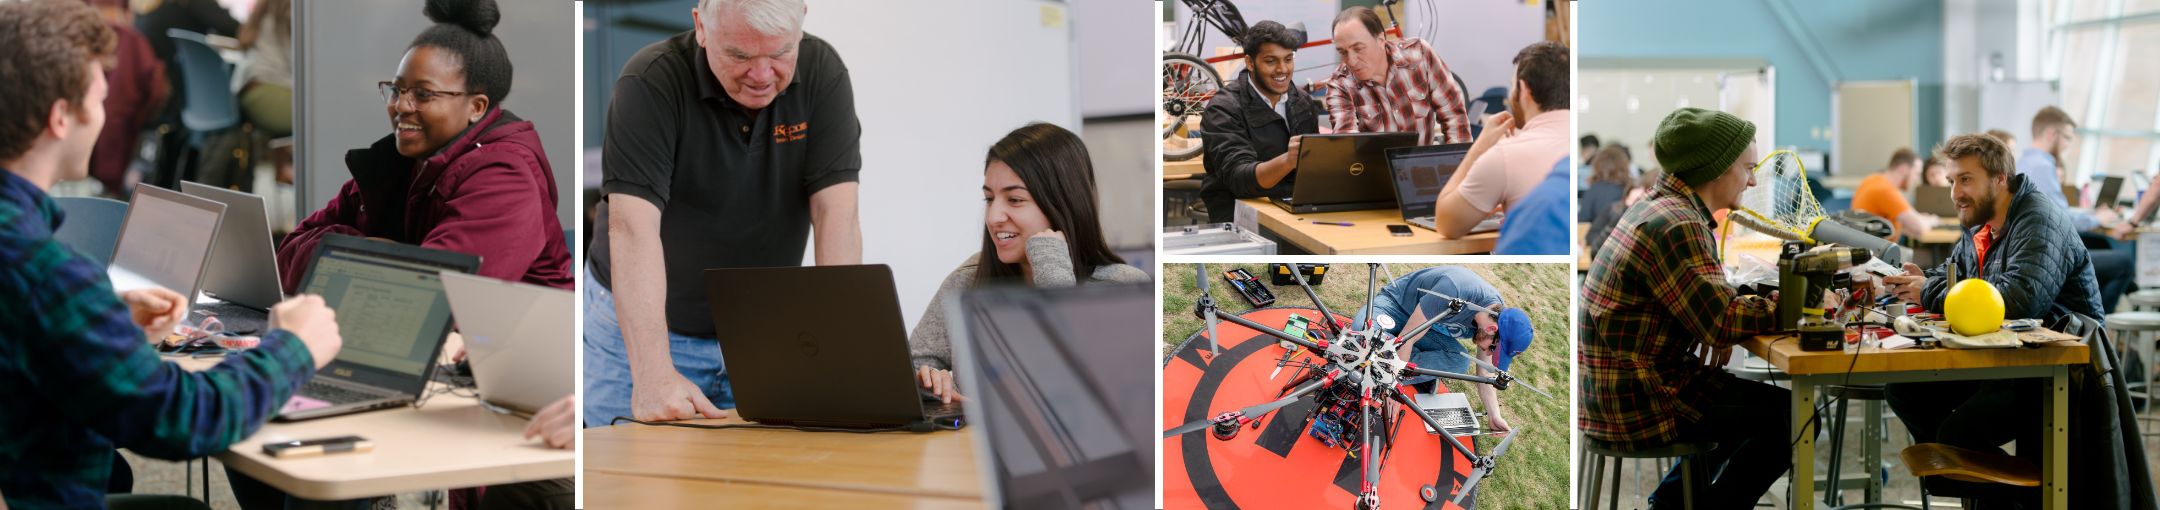 a collage of 5 images of students and professors collaborating and a large drone